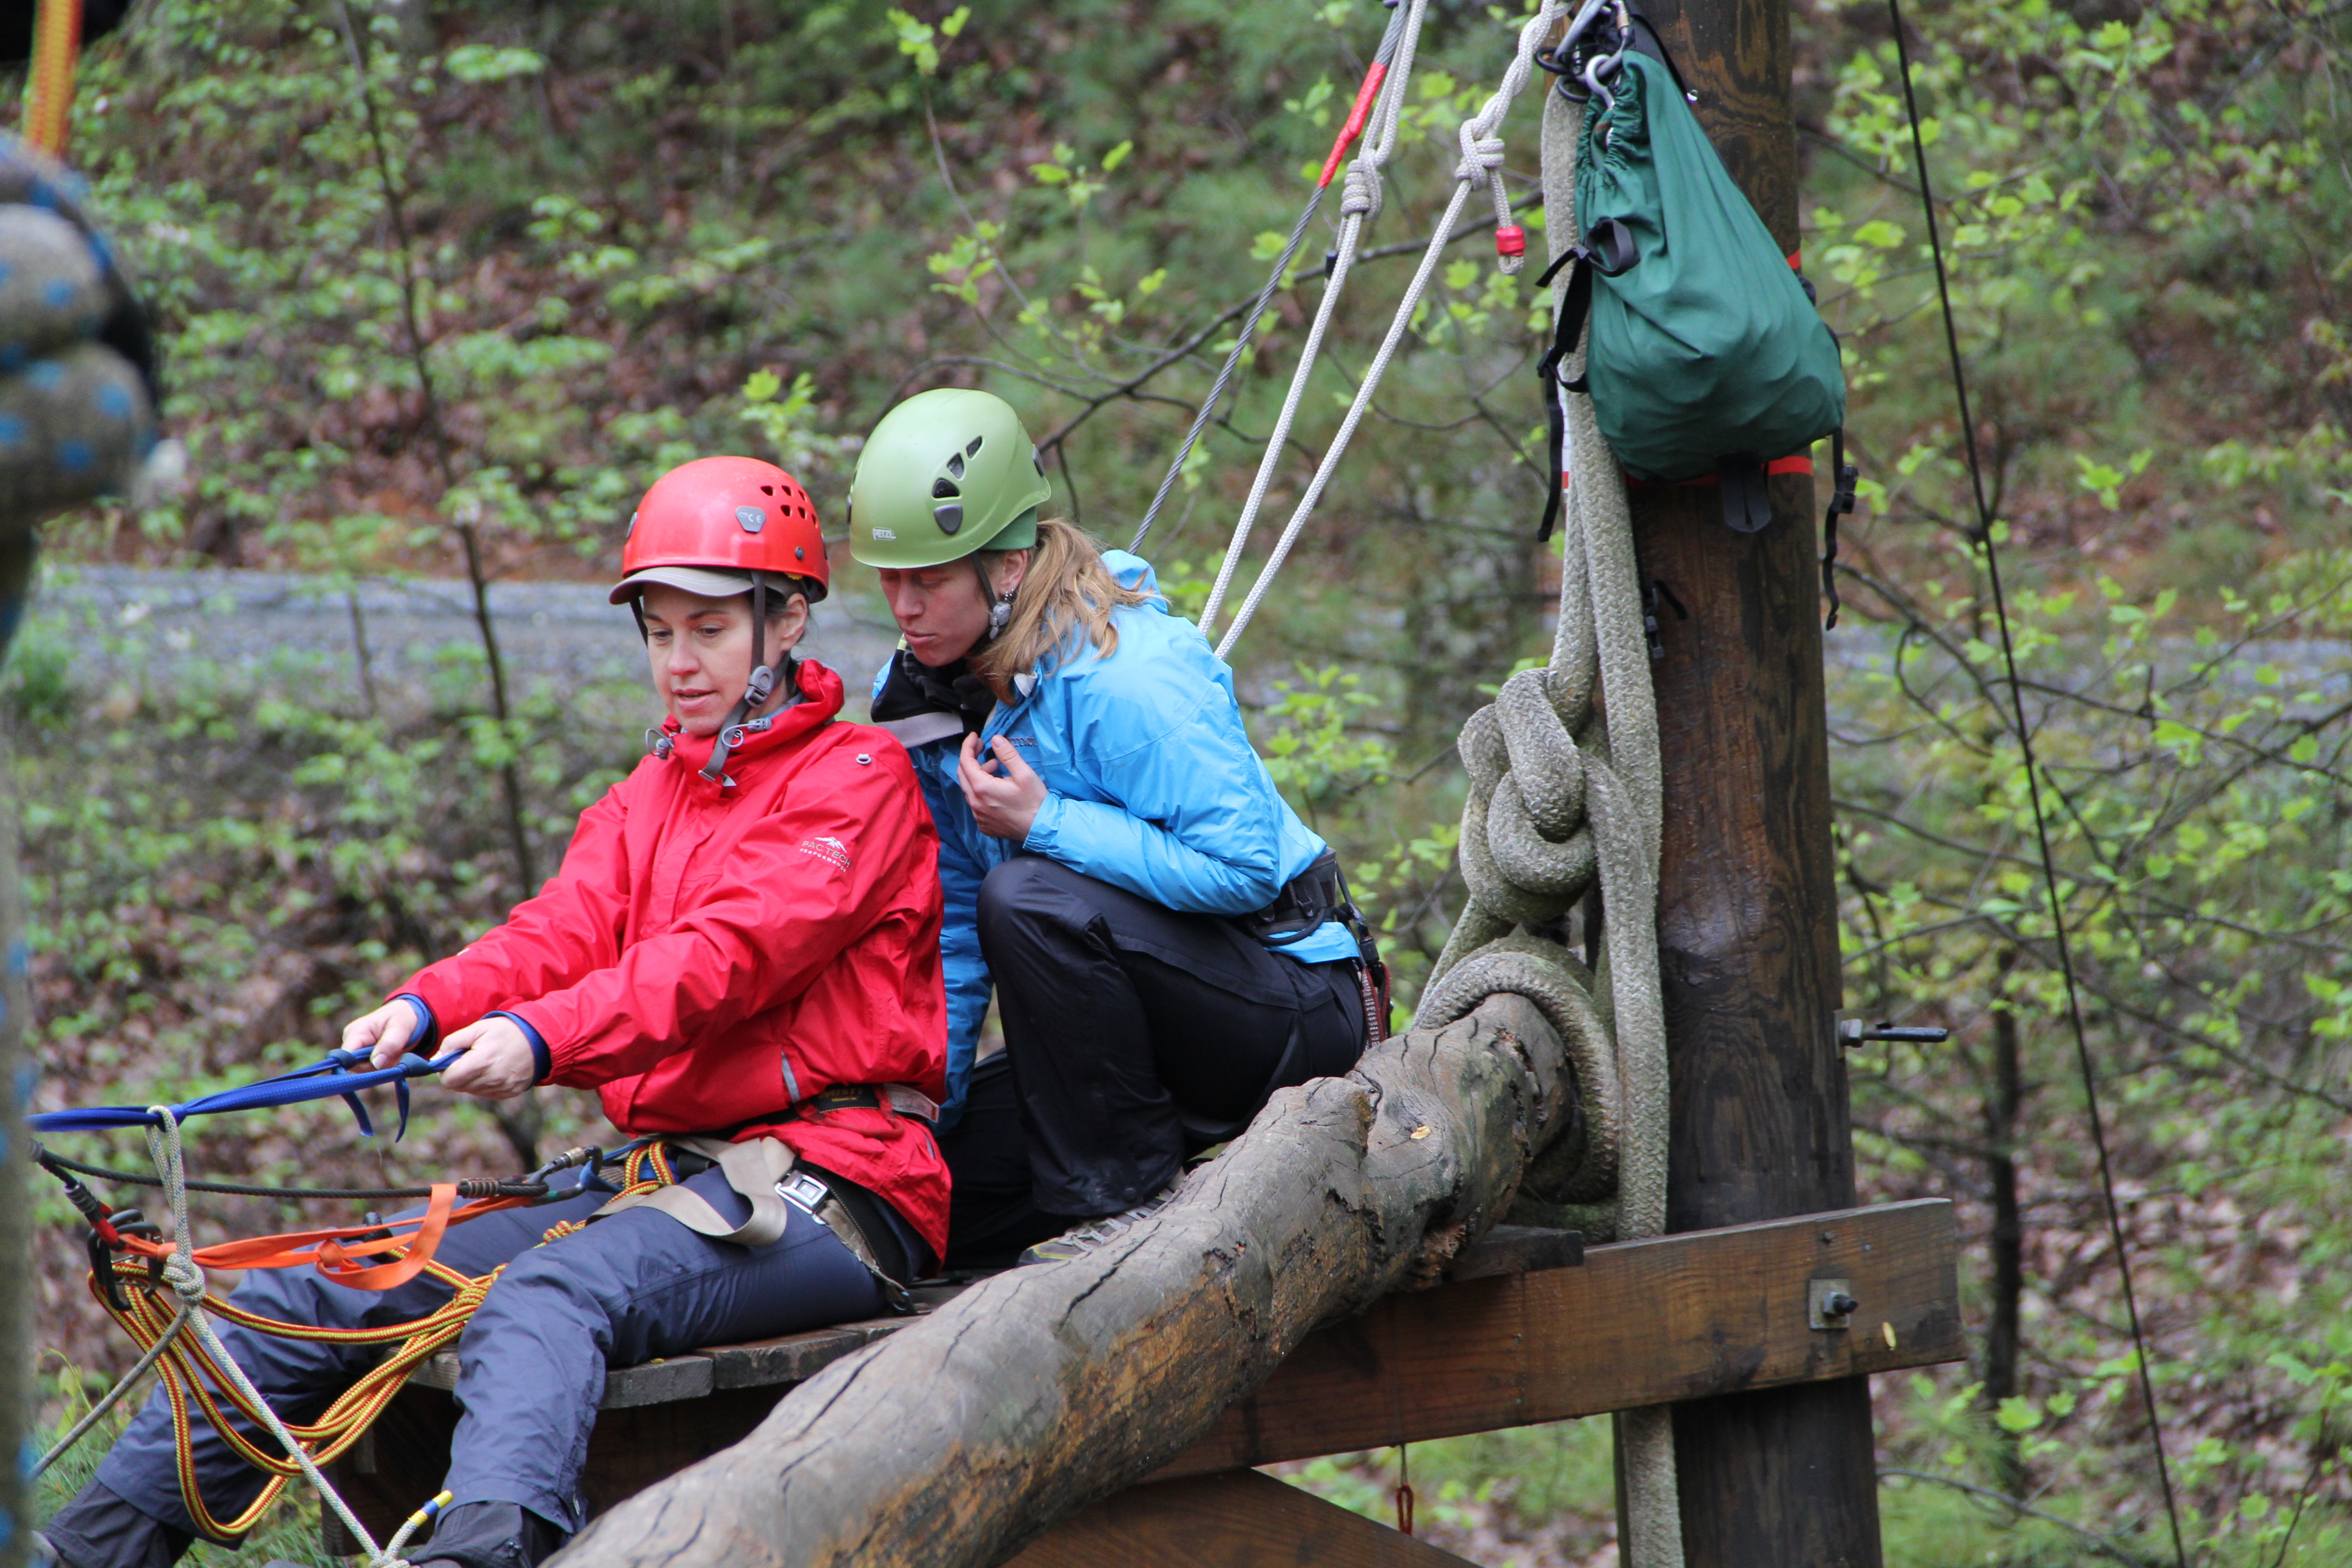 Outward Bound Professional instructors